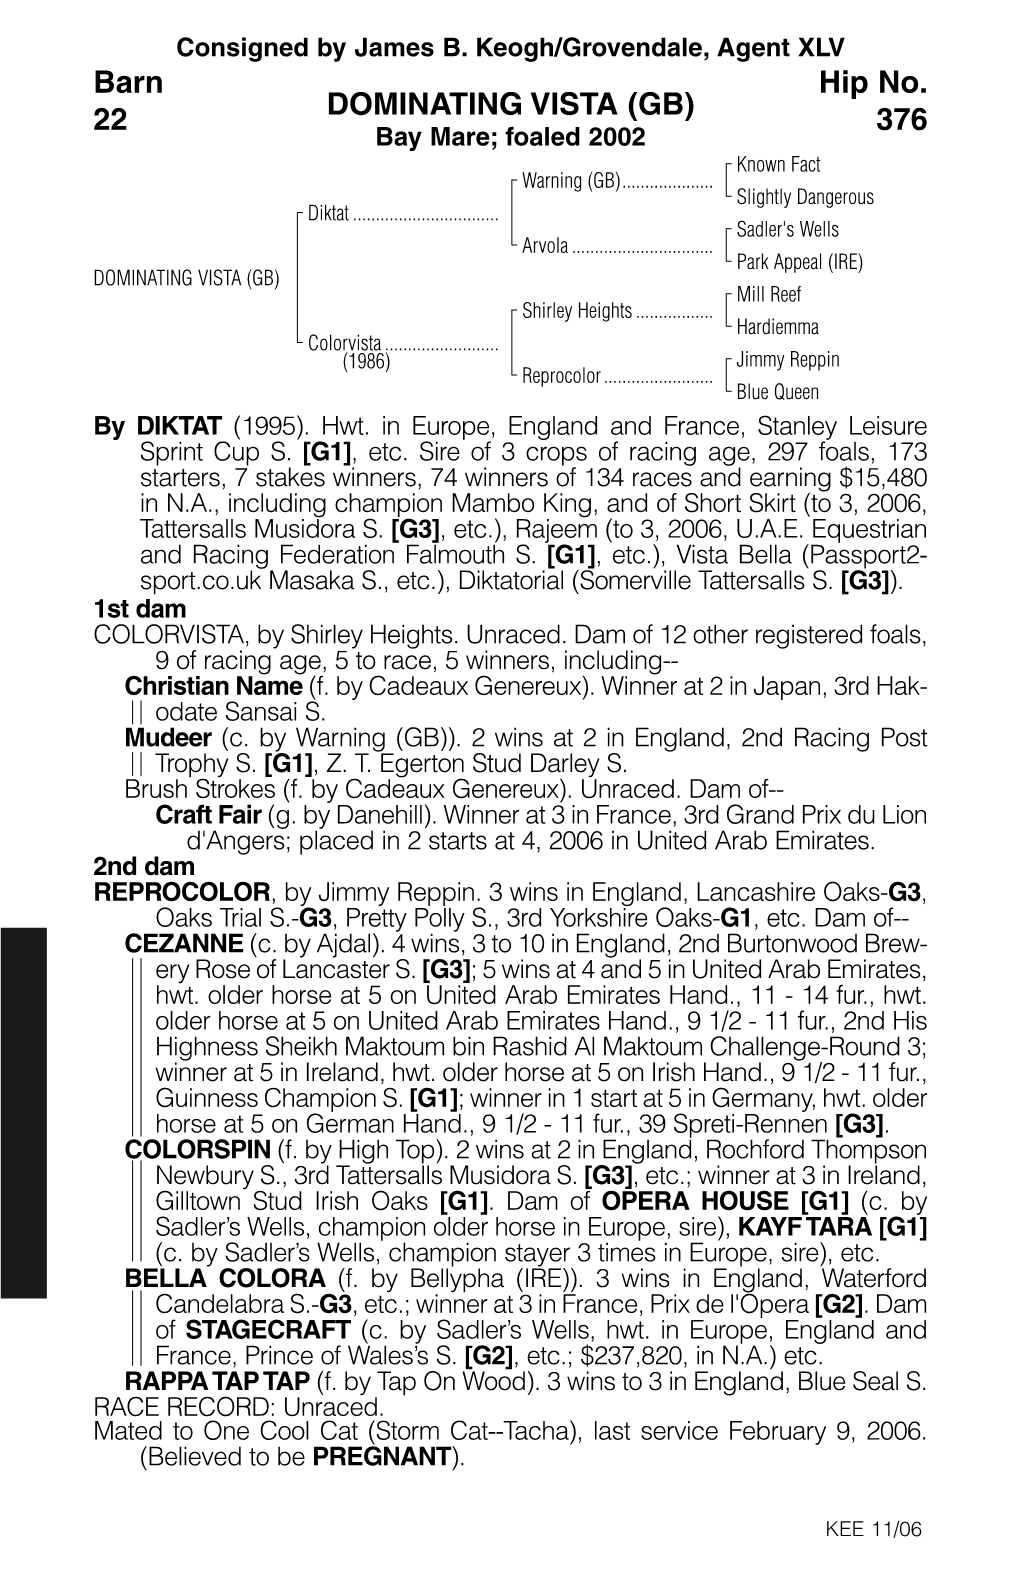 DOMINATING VISTA (GB) 376 Bay Mare; Foaled 2002 Known Fact Warning (GB)